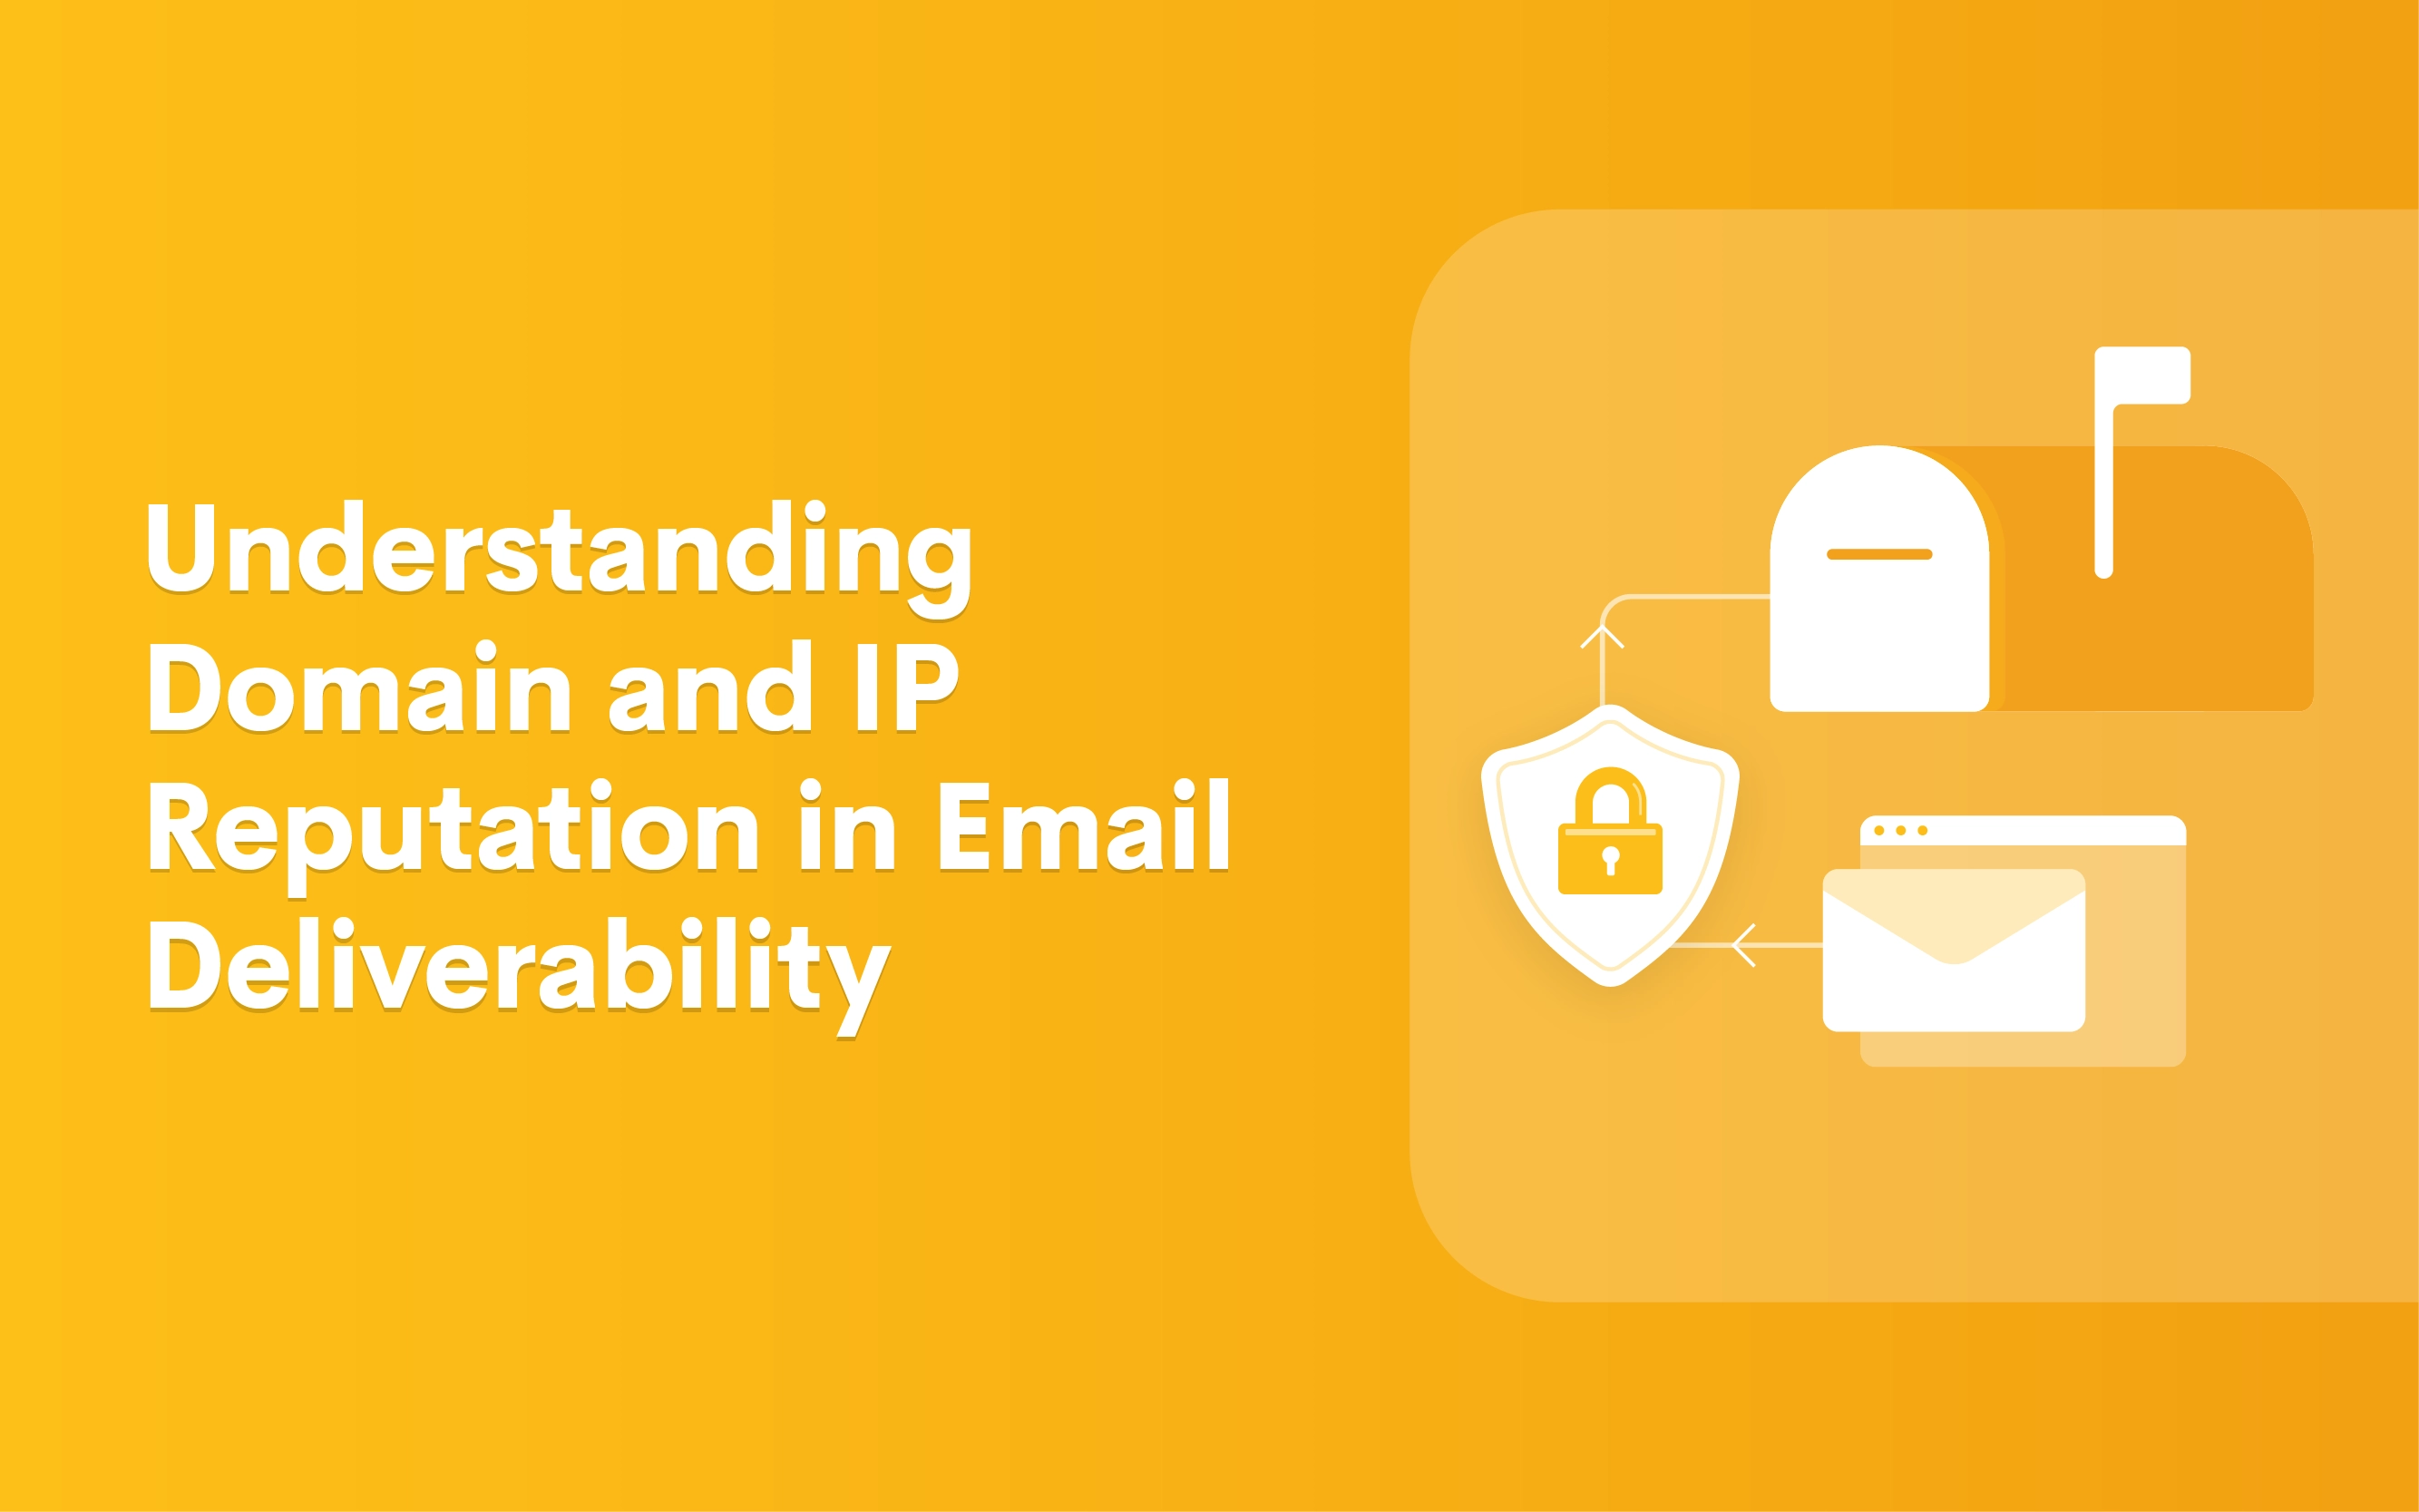 Understanding Domain and IP Reputation in Email Deliverability